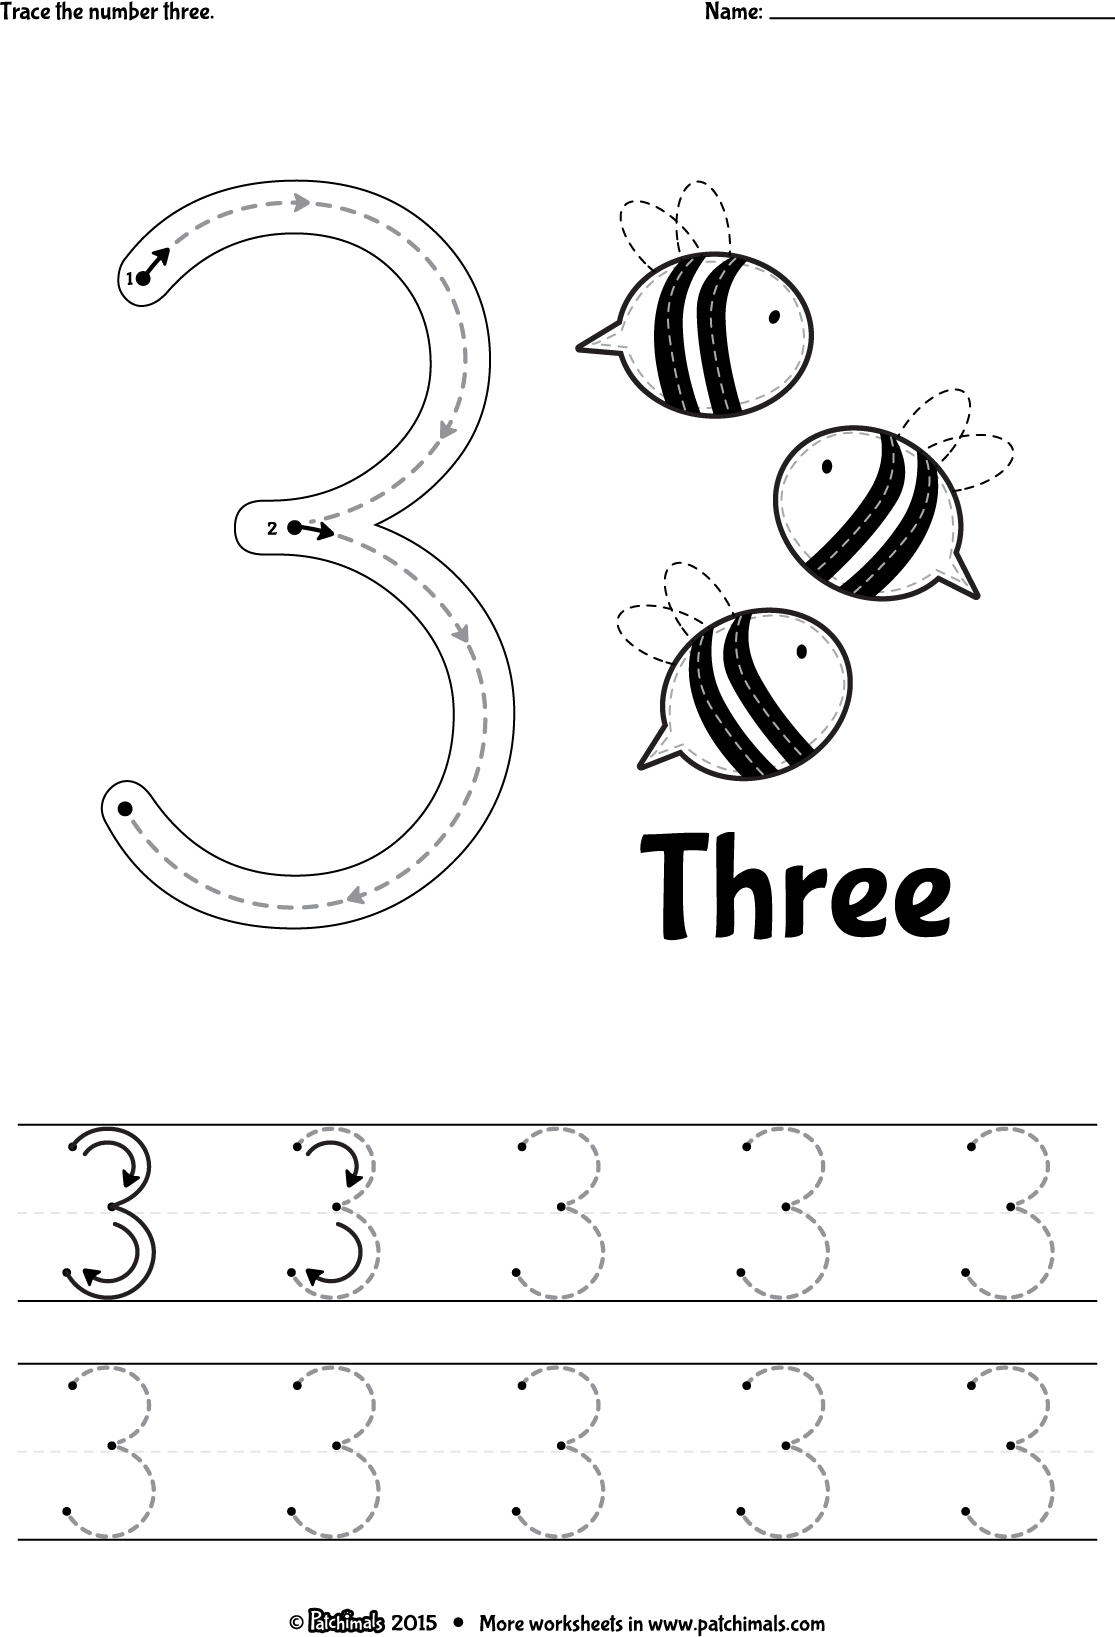 Patchimals - Educational And Cultural Contents For Children: Apps | Free Printable Number 3 Worksheets